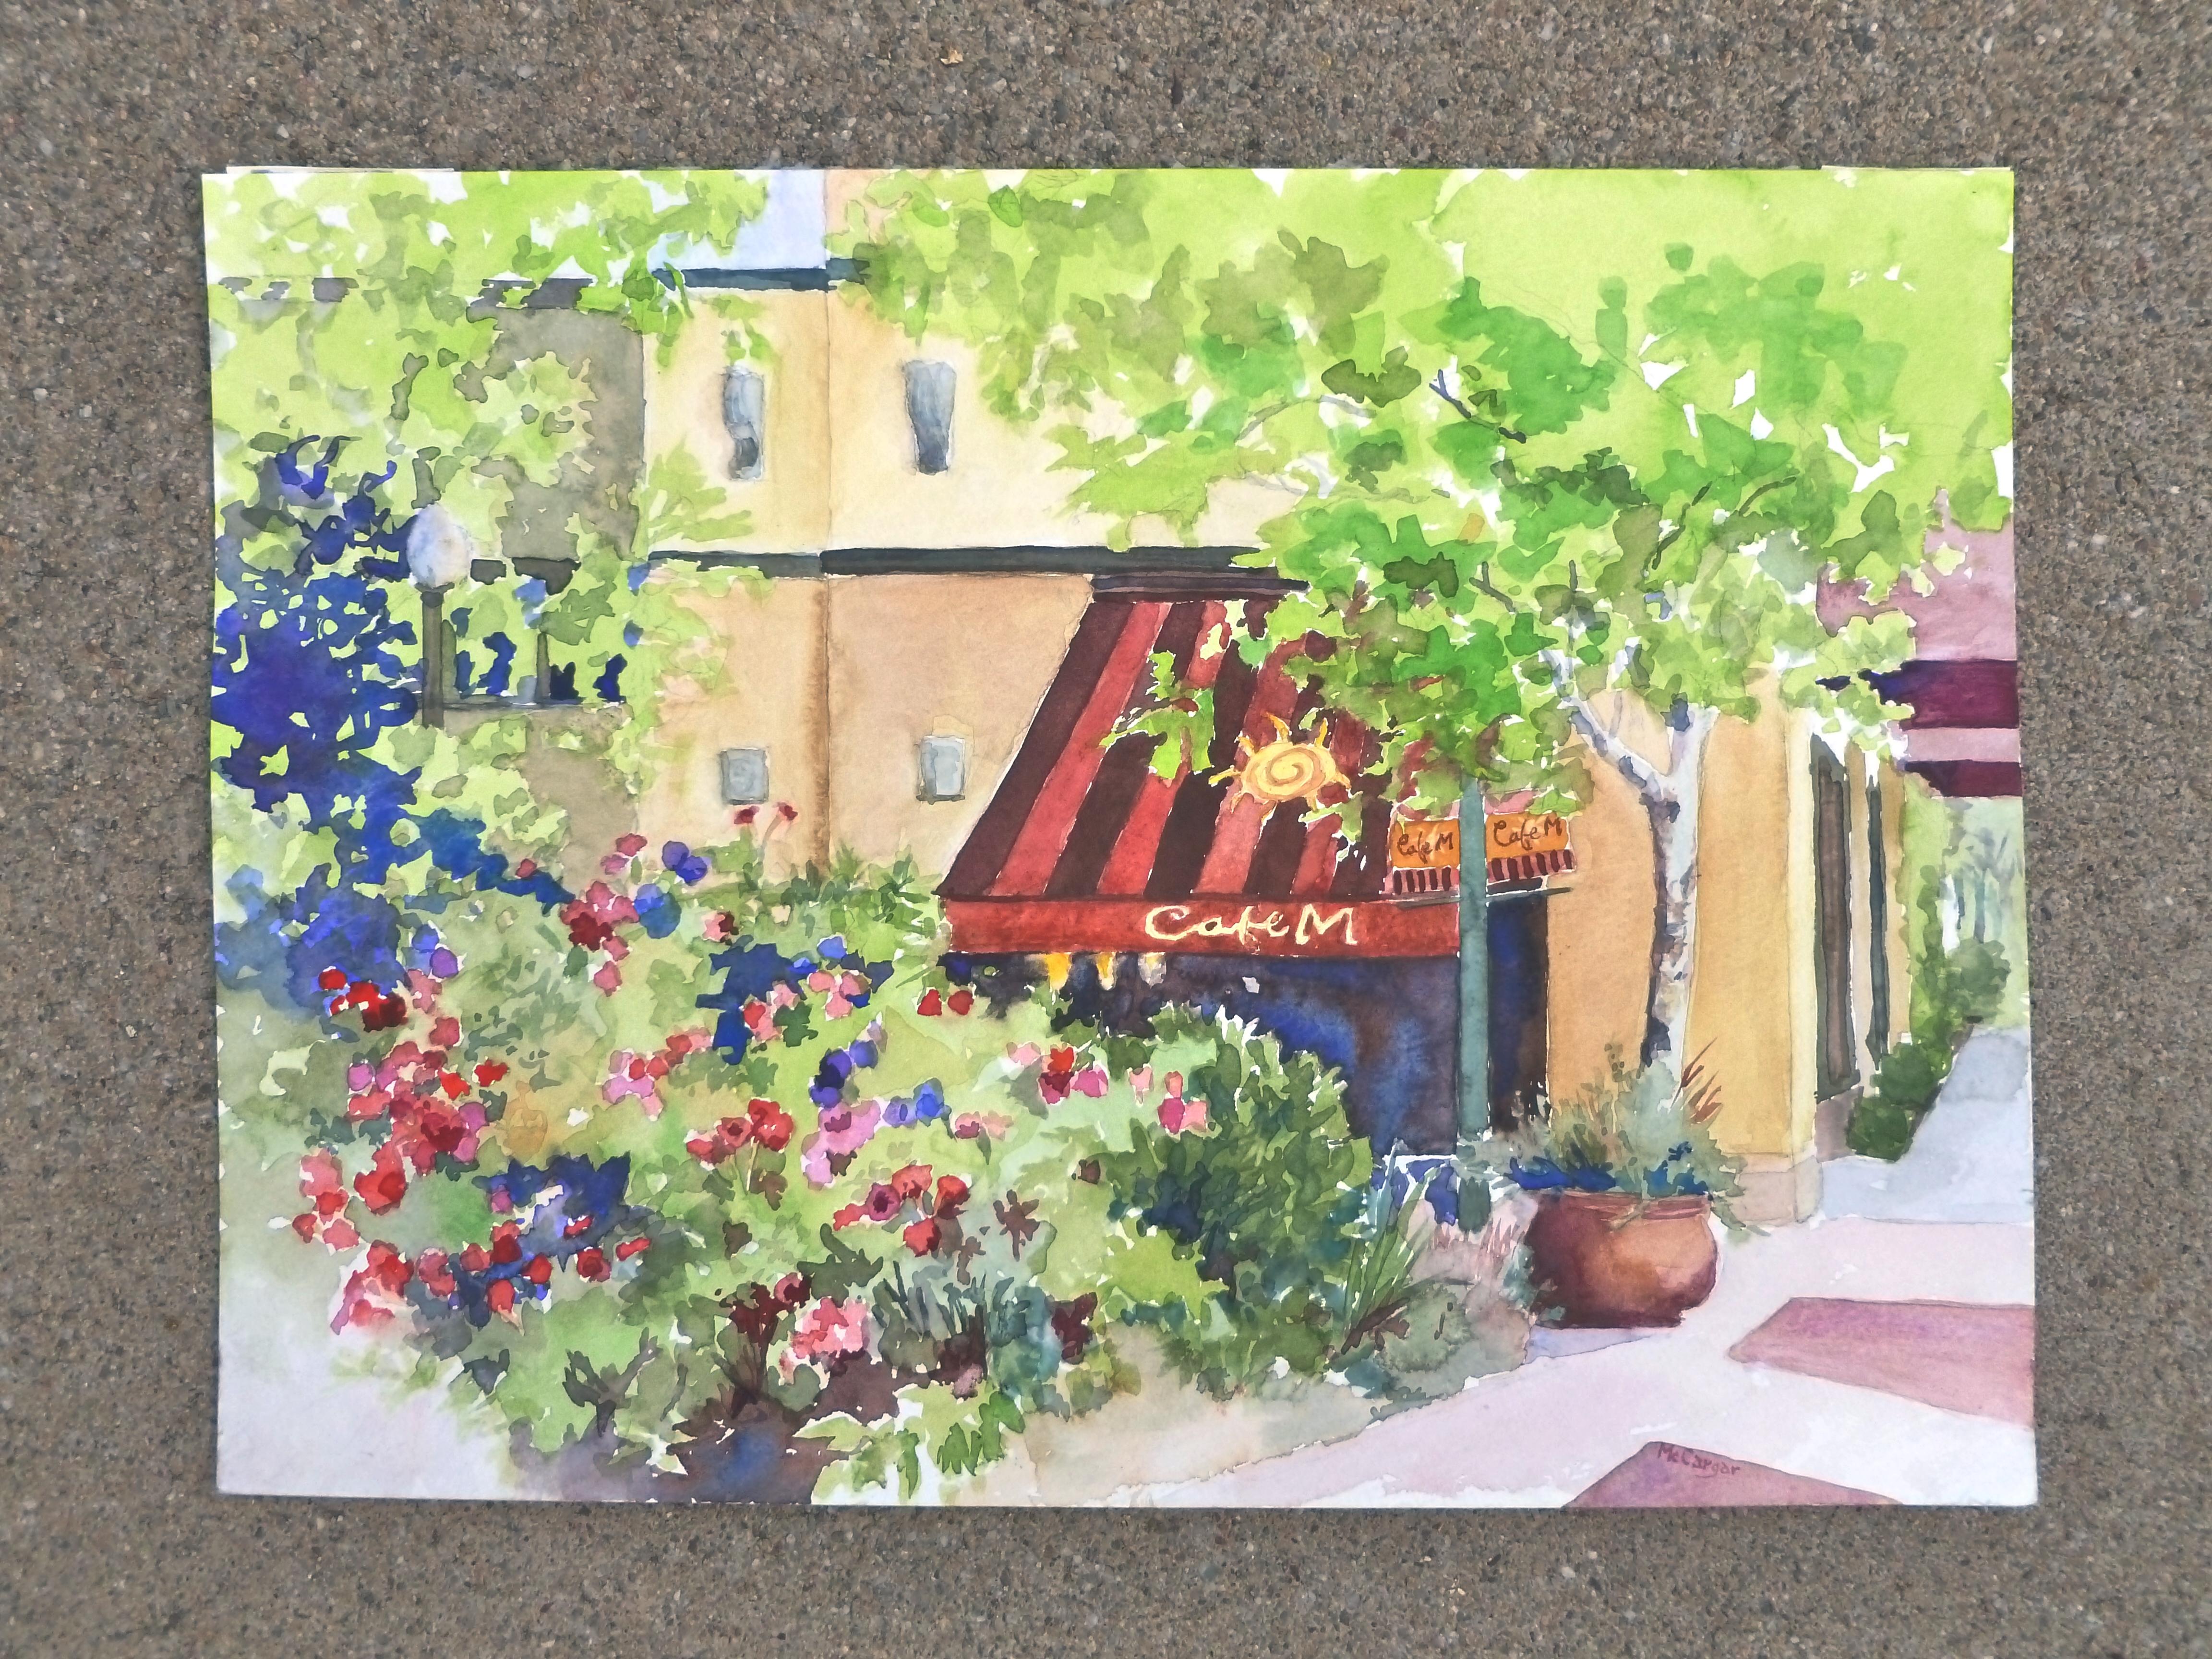 Cafe M Catherine McCargar, Watercolor painting on paper 2